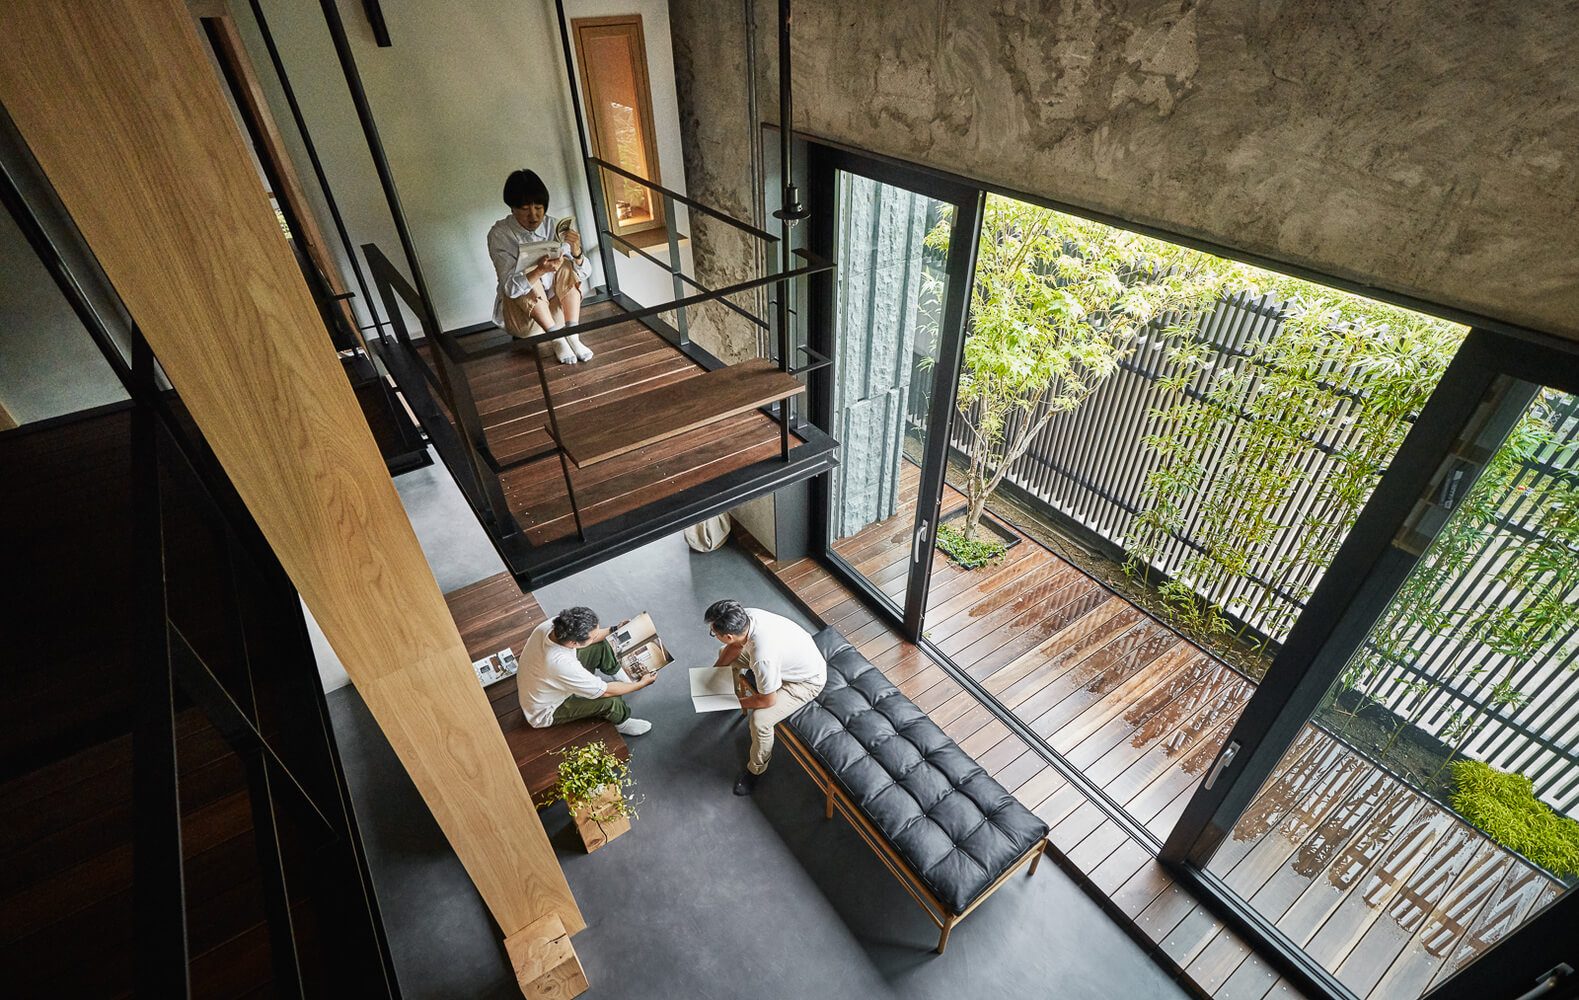 The first mezzanine floor overlooks the entrance area of Life in Tree House